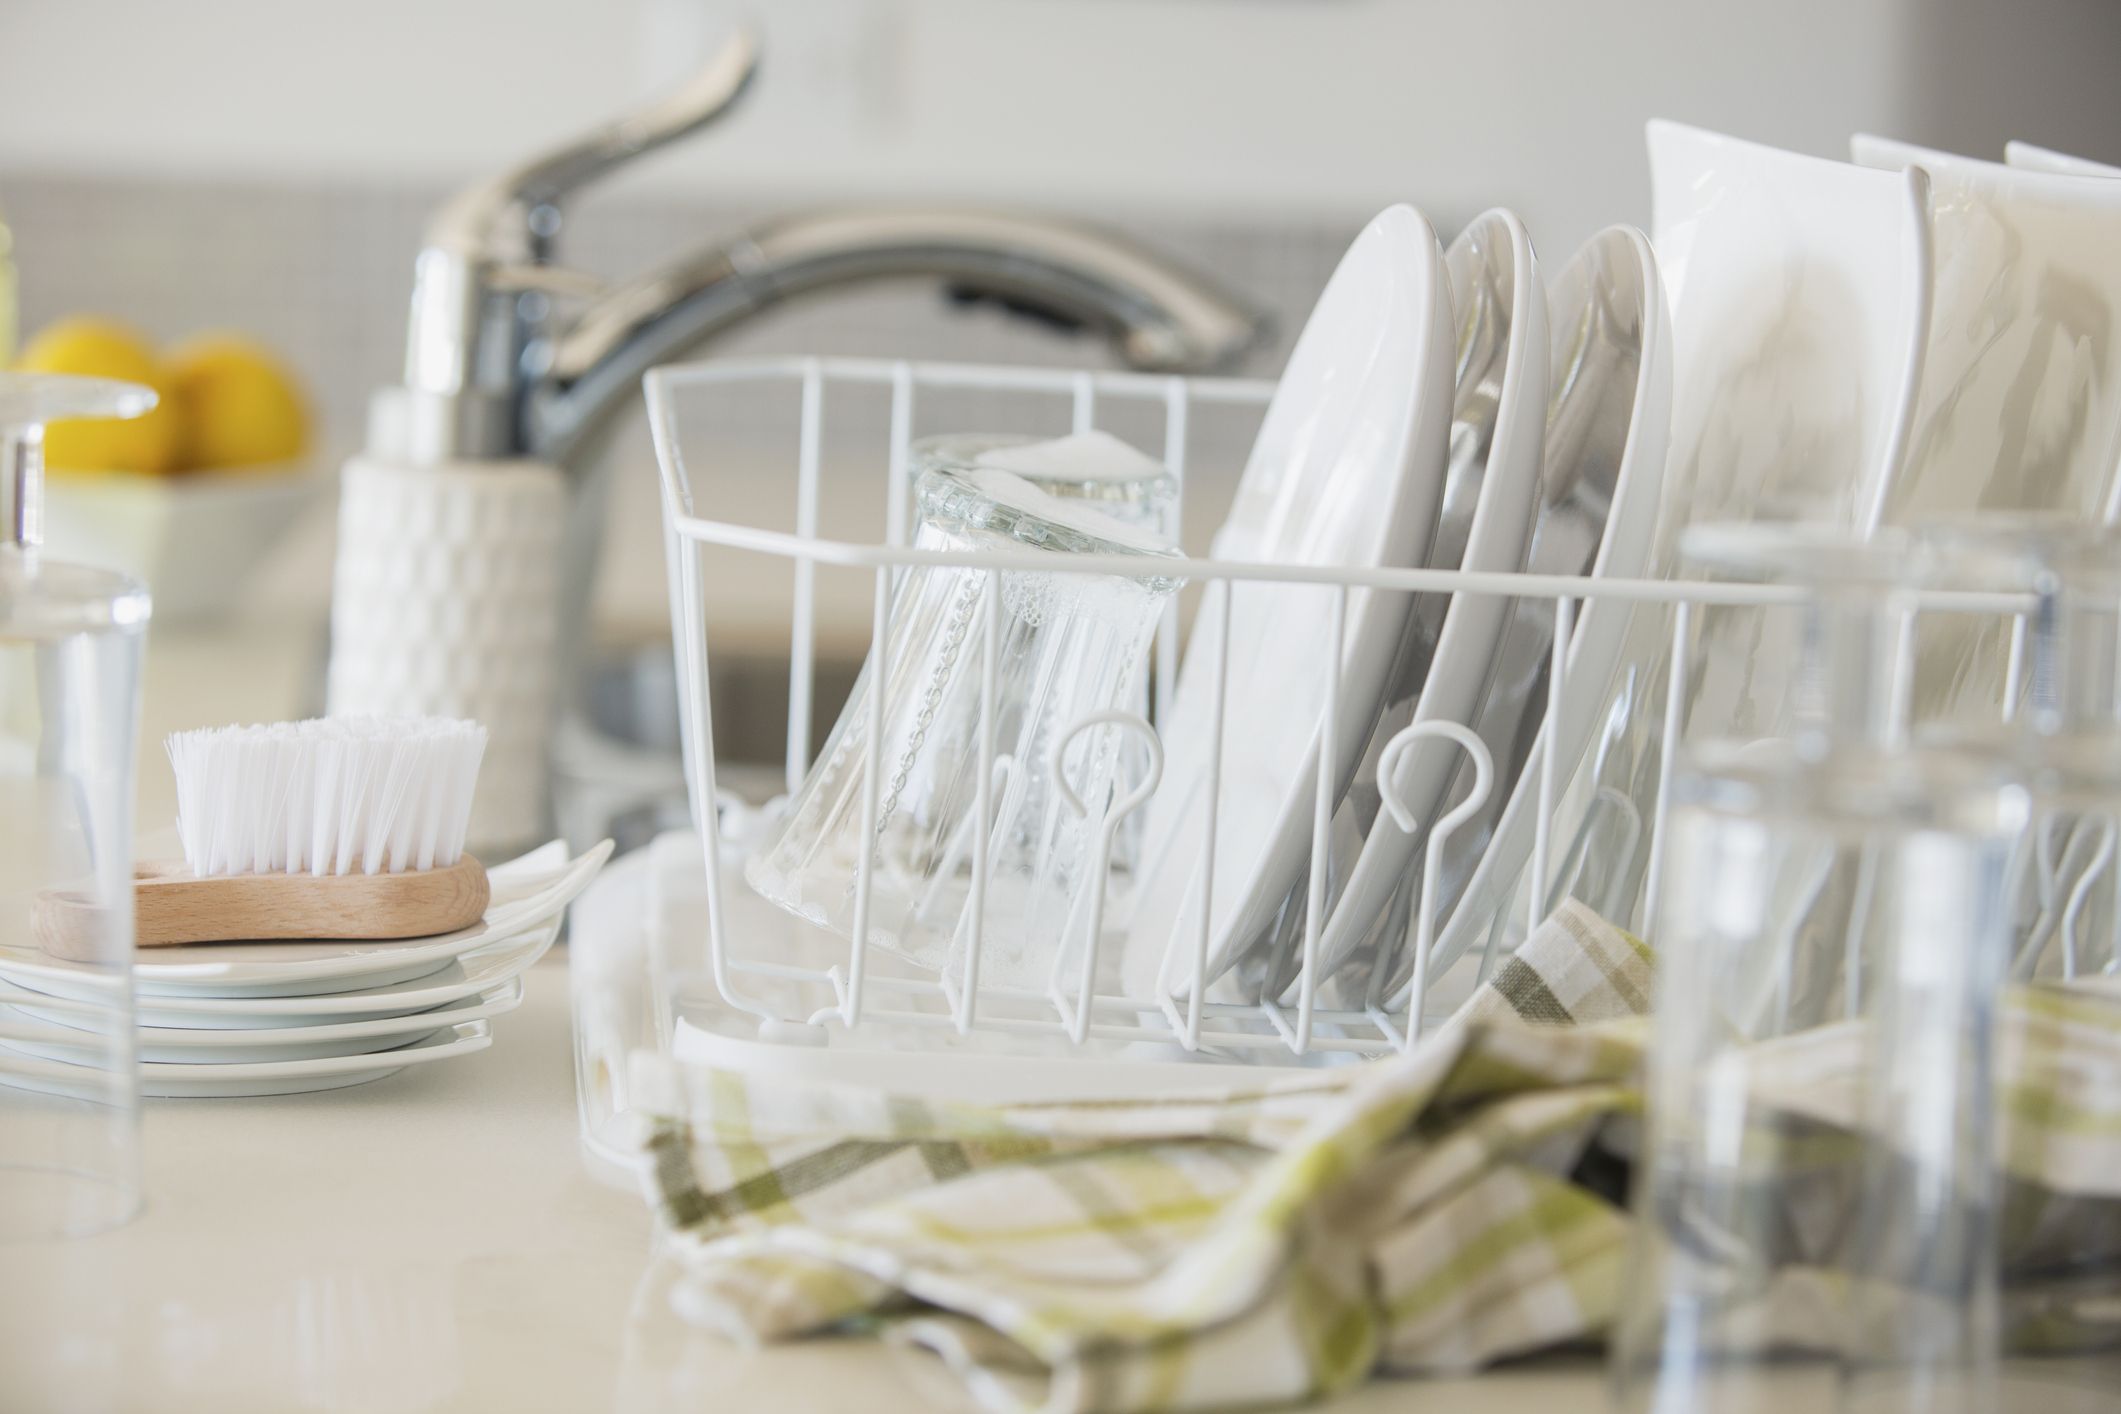 10 Dish Drying Racks That Are Better than a Tea Towel